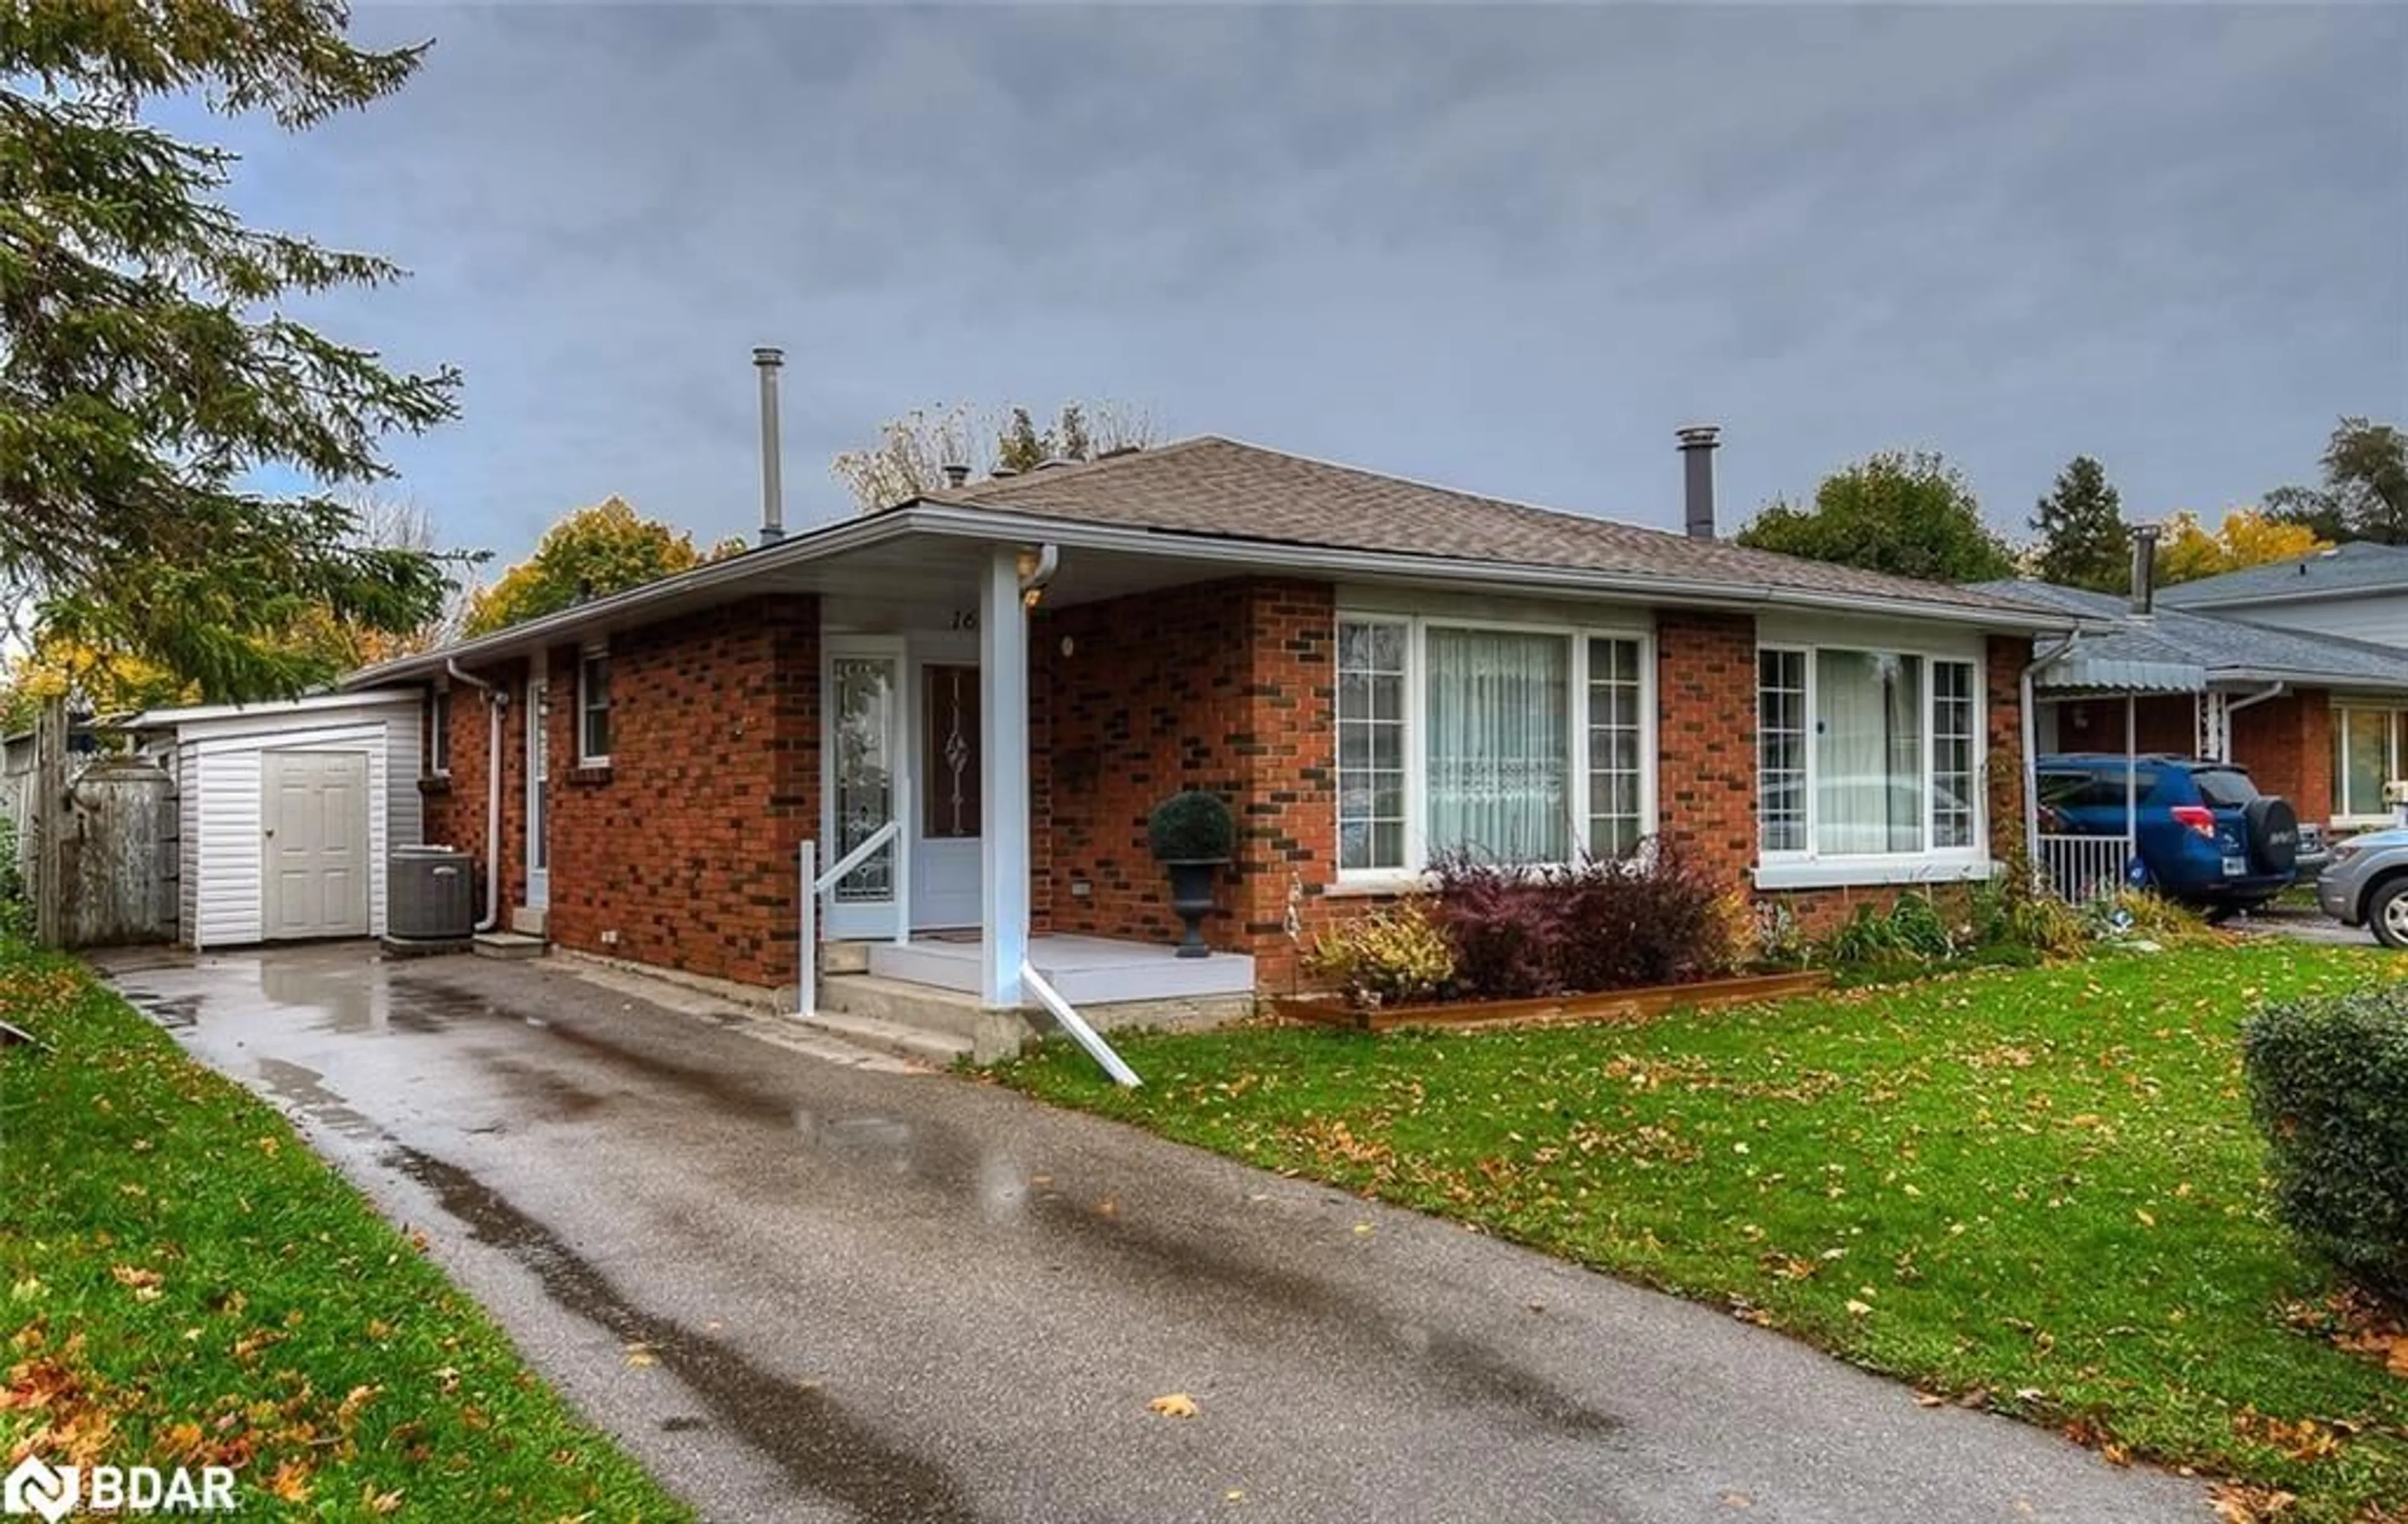 Home with brick exterior material for 162 Mooregate Cres, Kitchener Ontario N2M 2G1